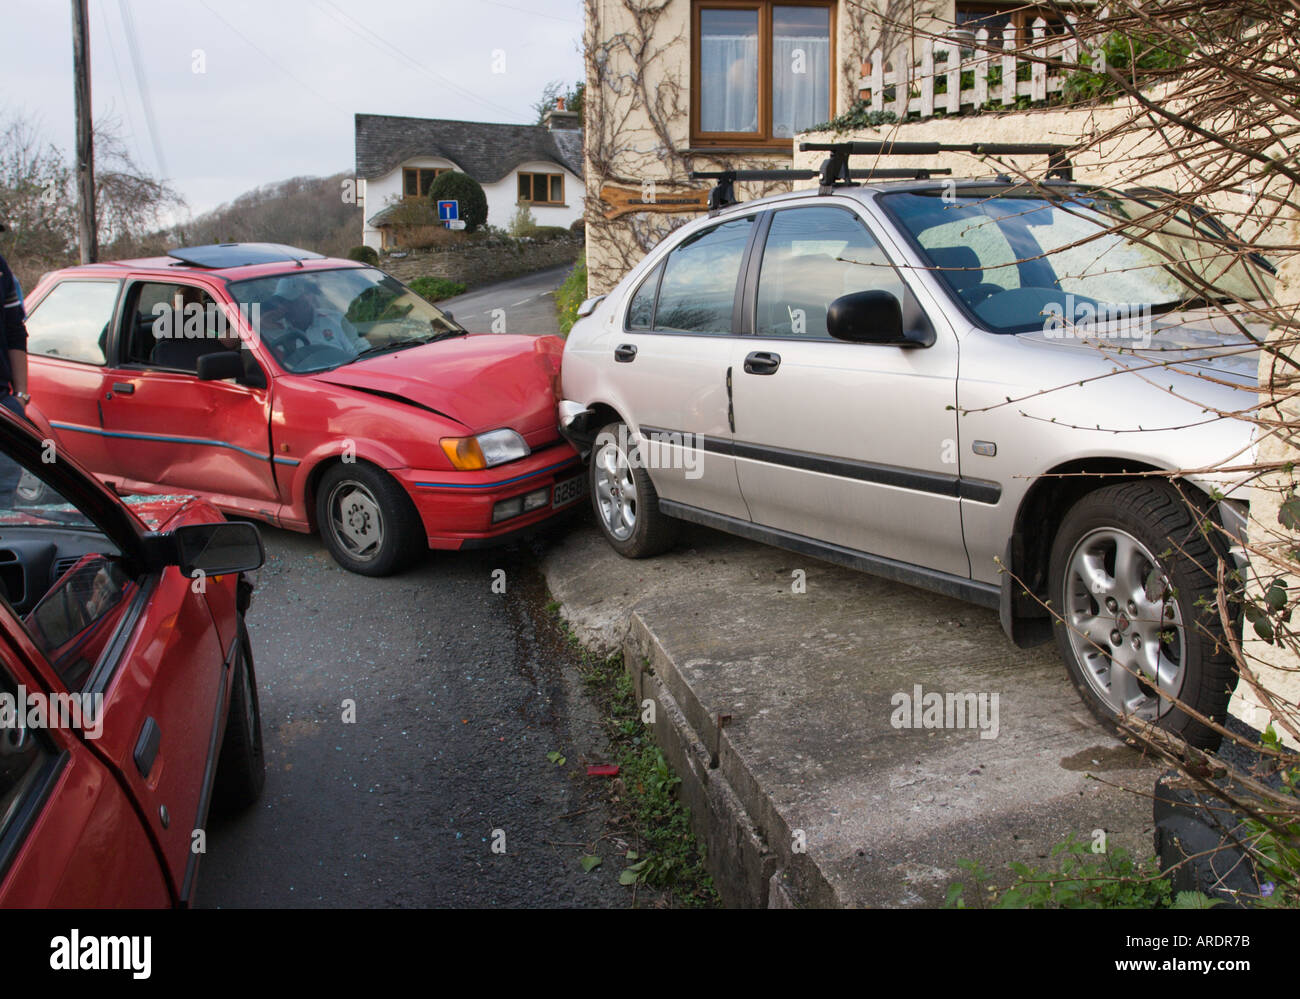 Vehicles badly damaged where one driven whilst under the influence of alcohol has gone into the back of another England Stock Photo